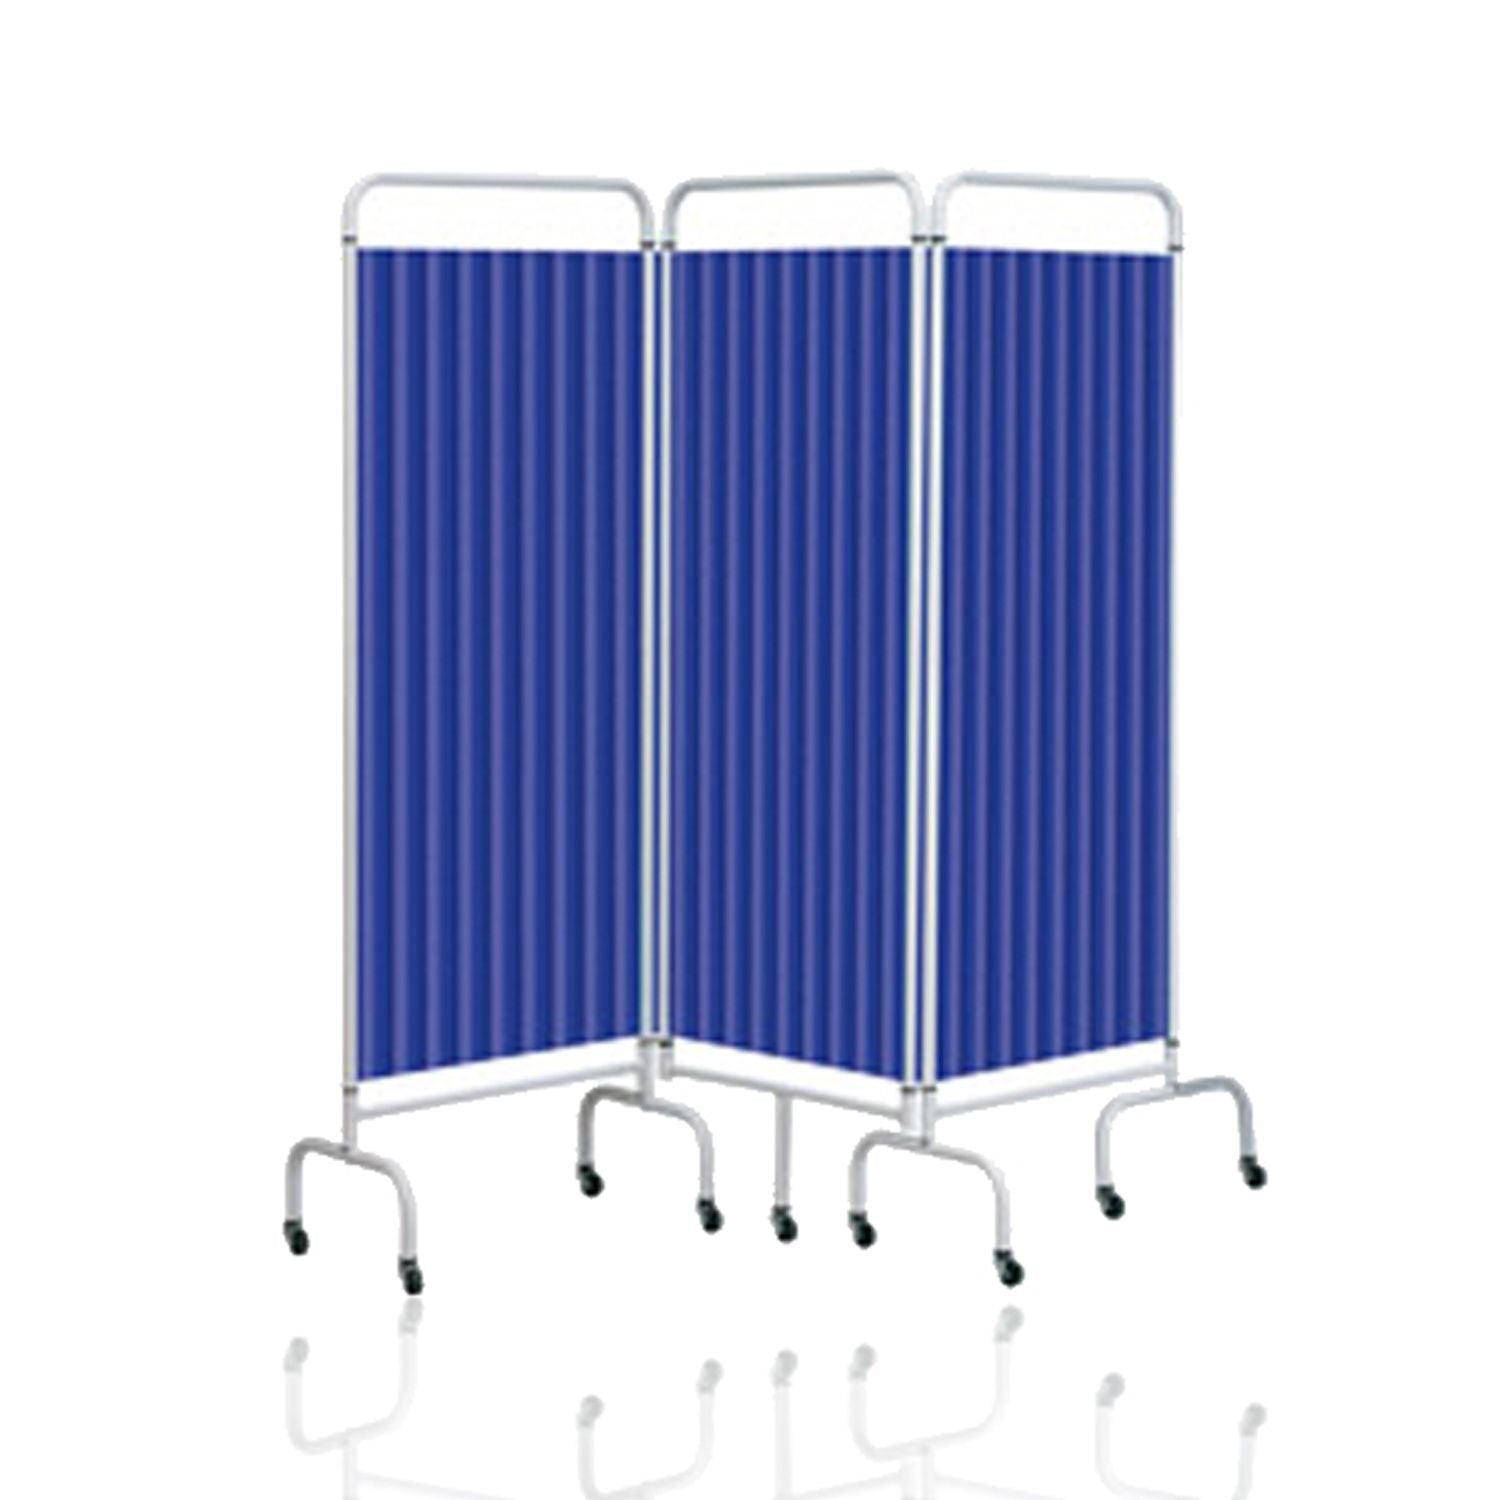 Sunflower 3 Section Mobile Folding Screen with Hygienic Disposable Curtains (7)